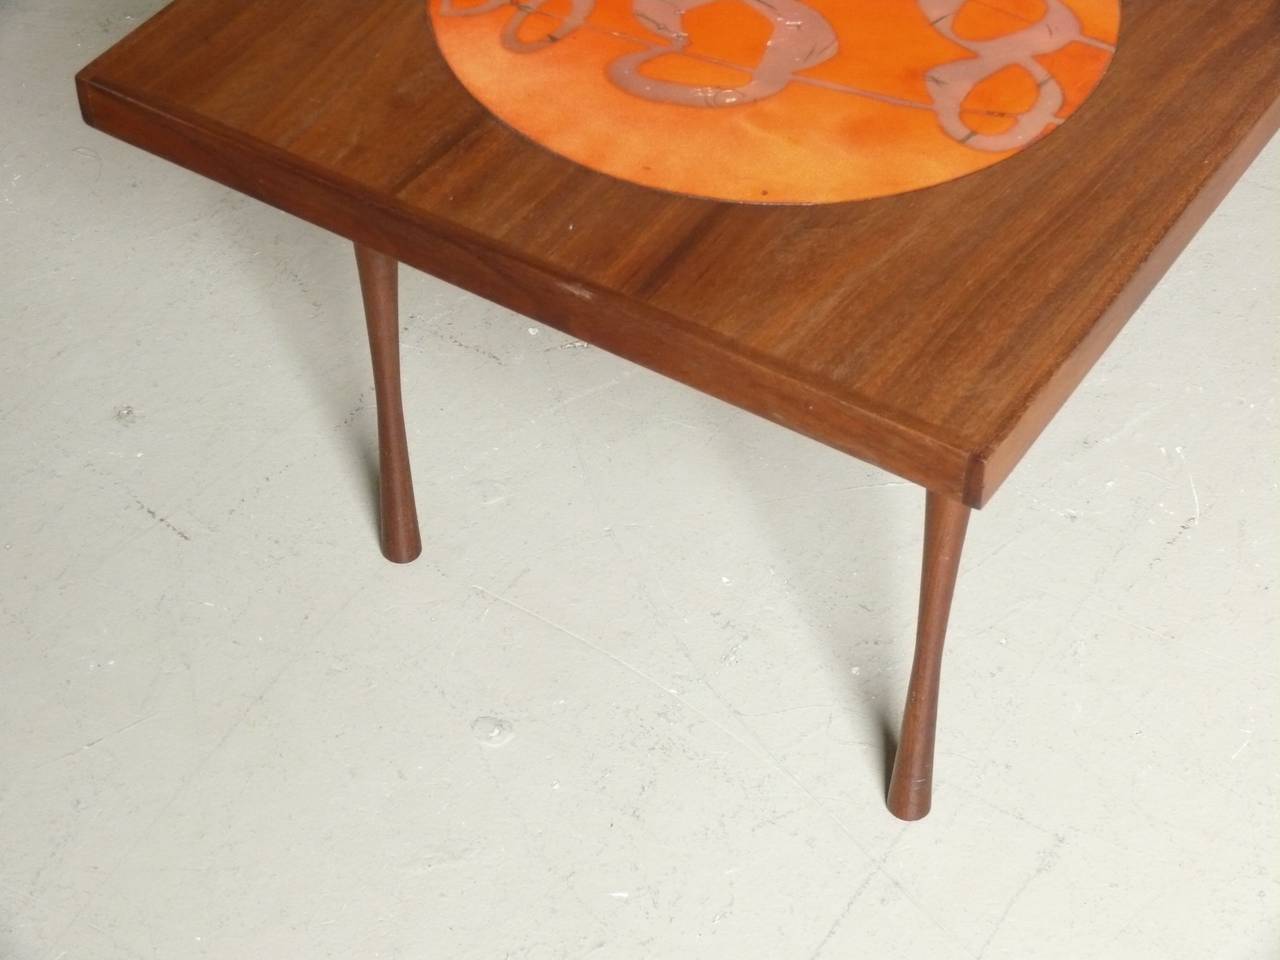 1960s beautifully grained walnut coffee table with 4 small & 1 large enamel over copper inset disks & tapered hourglass style legs.
Small disks- 1.5